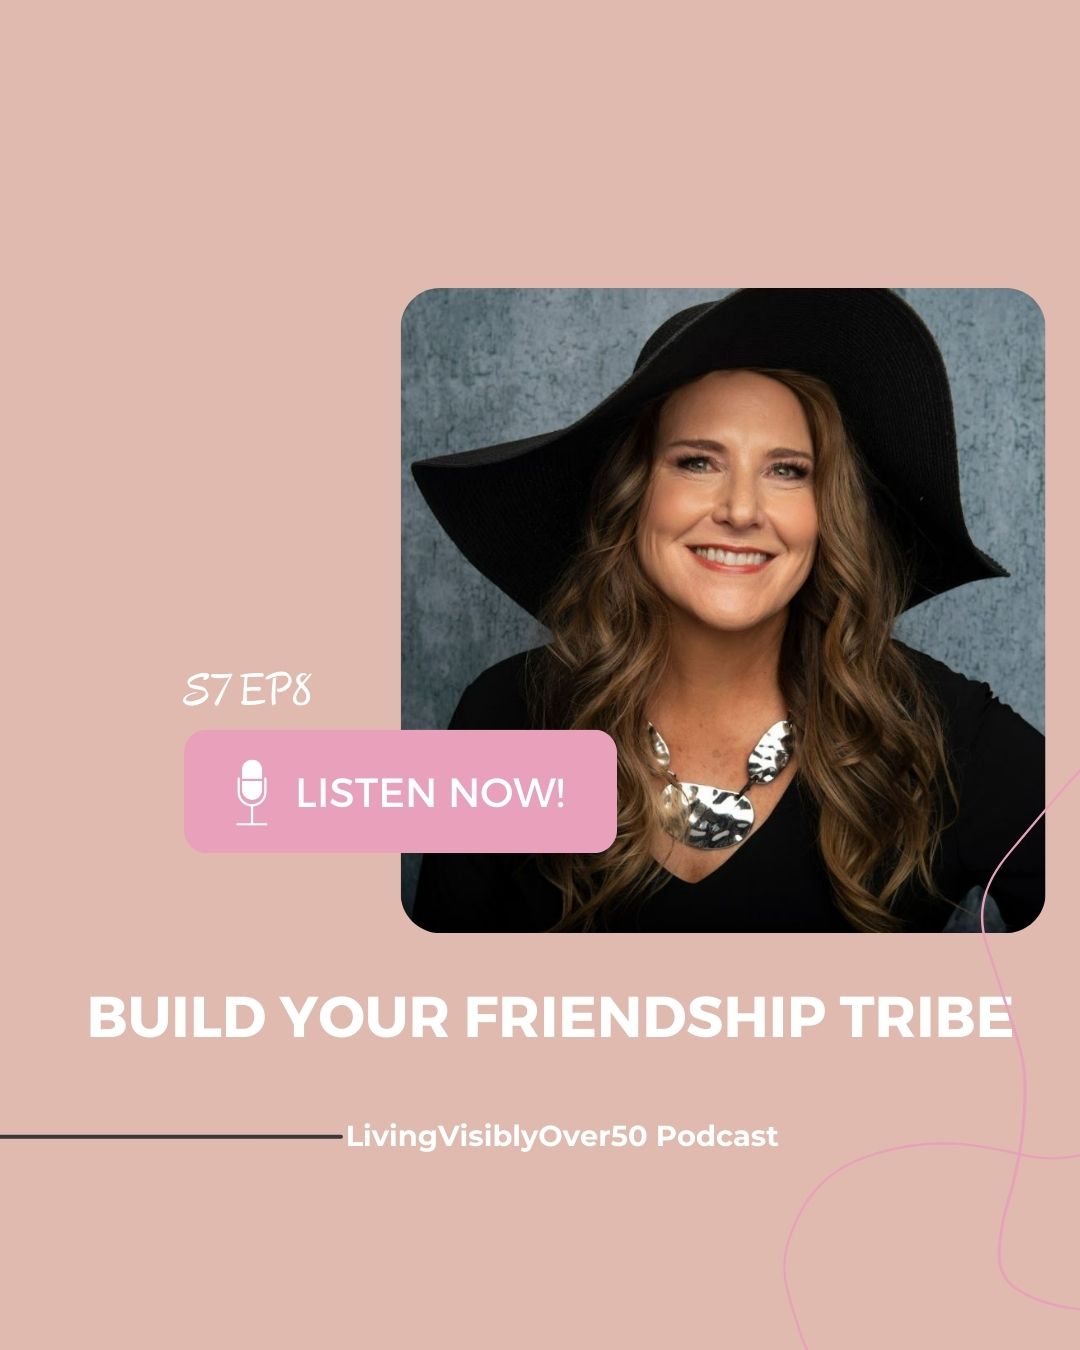 Living Visibly Over 50 podcast - Build Your Friendship Tribe.